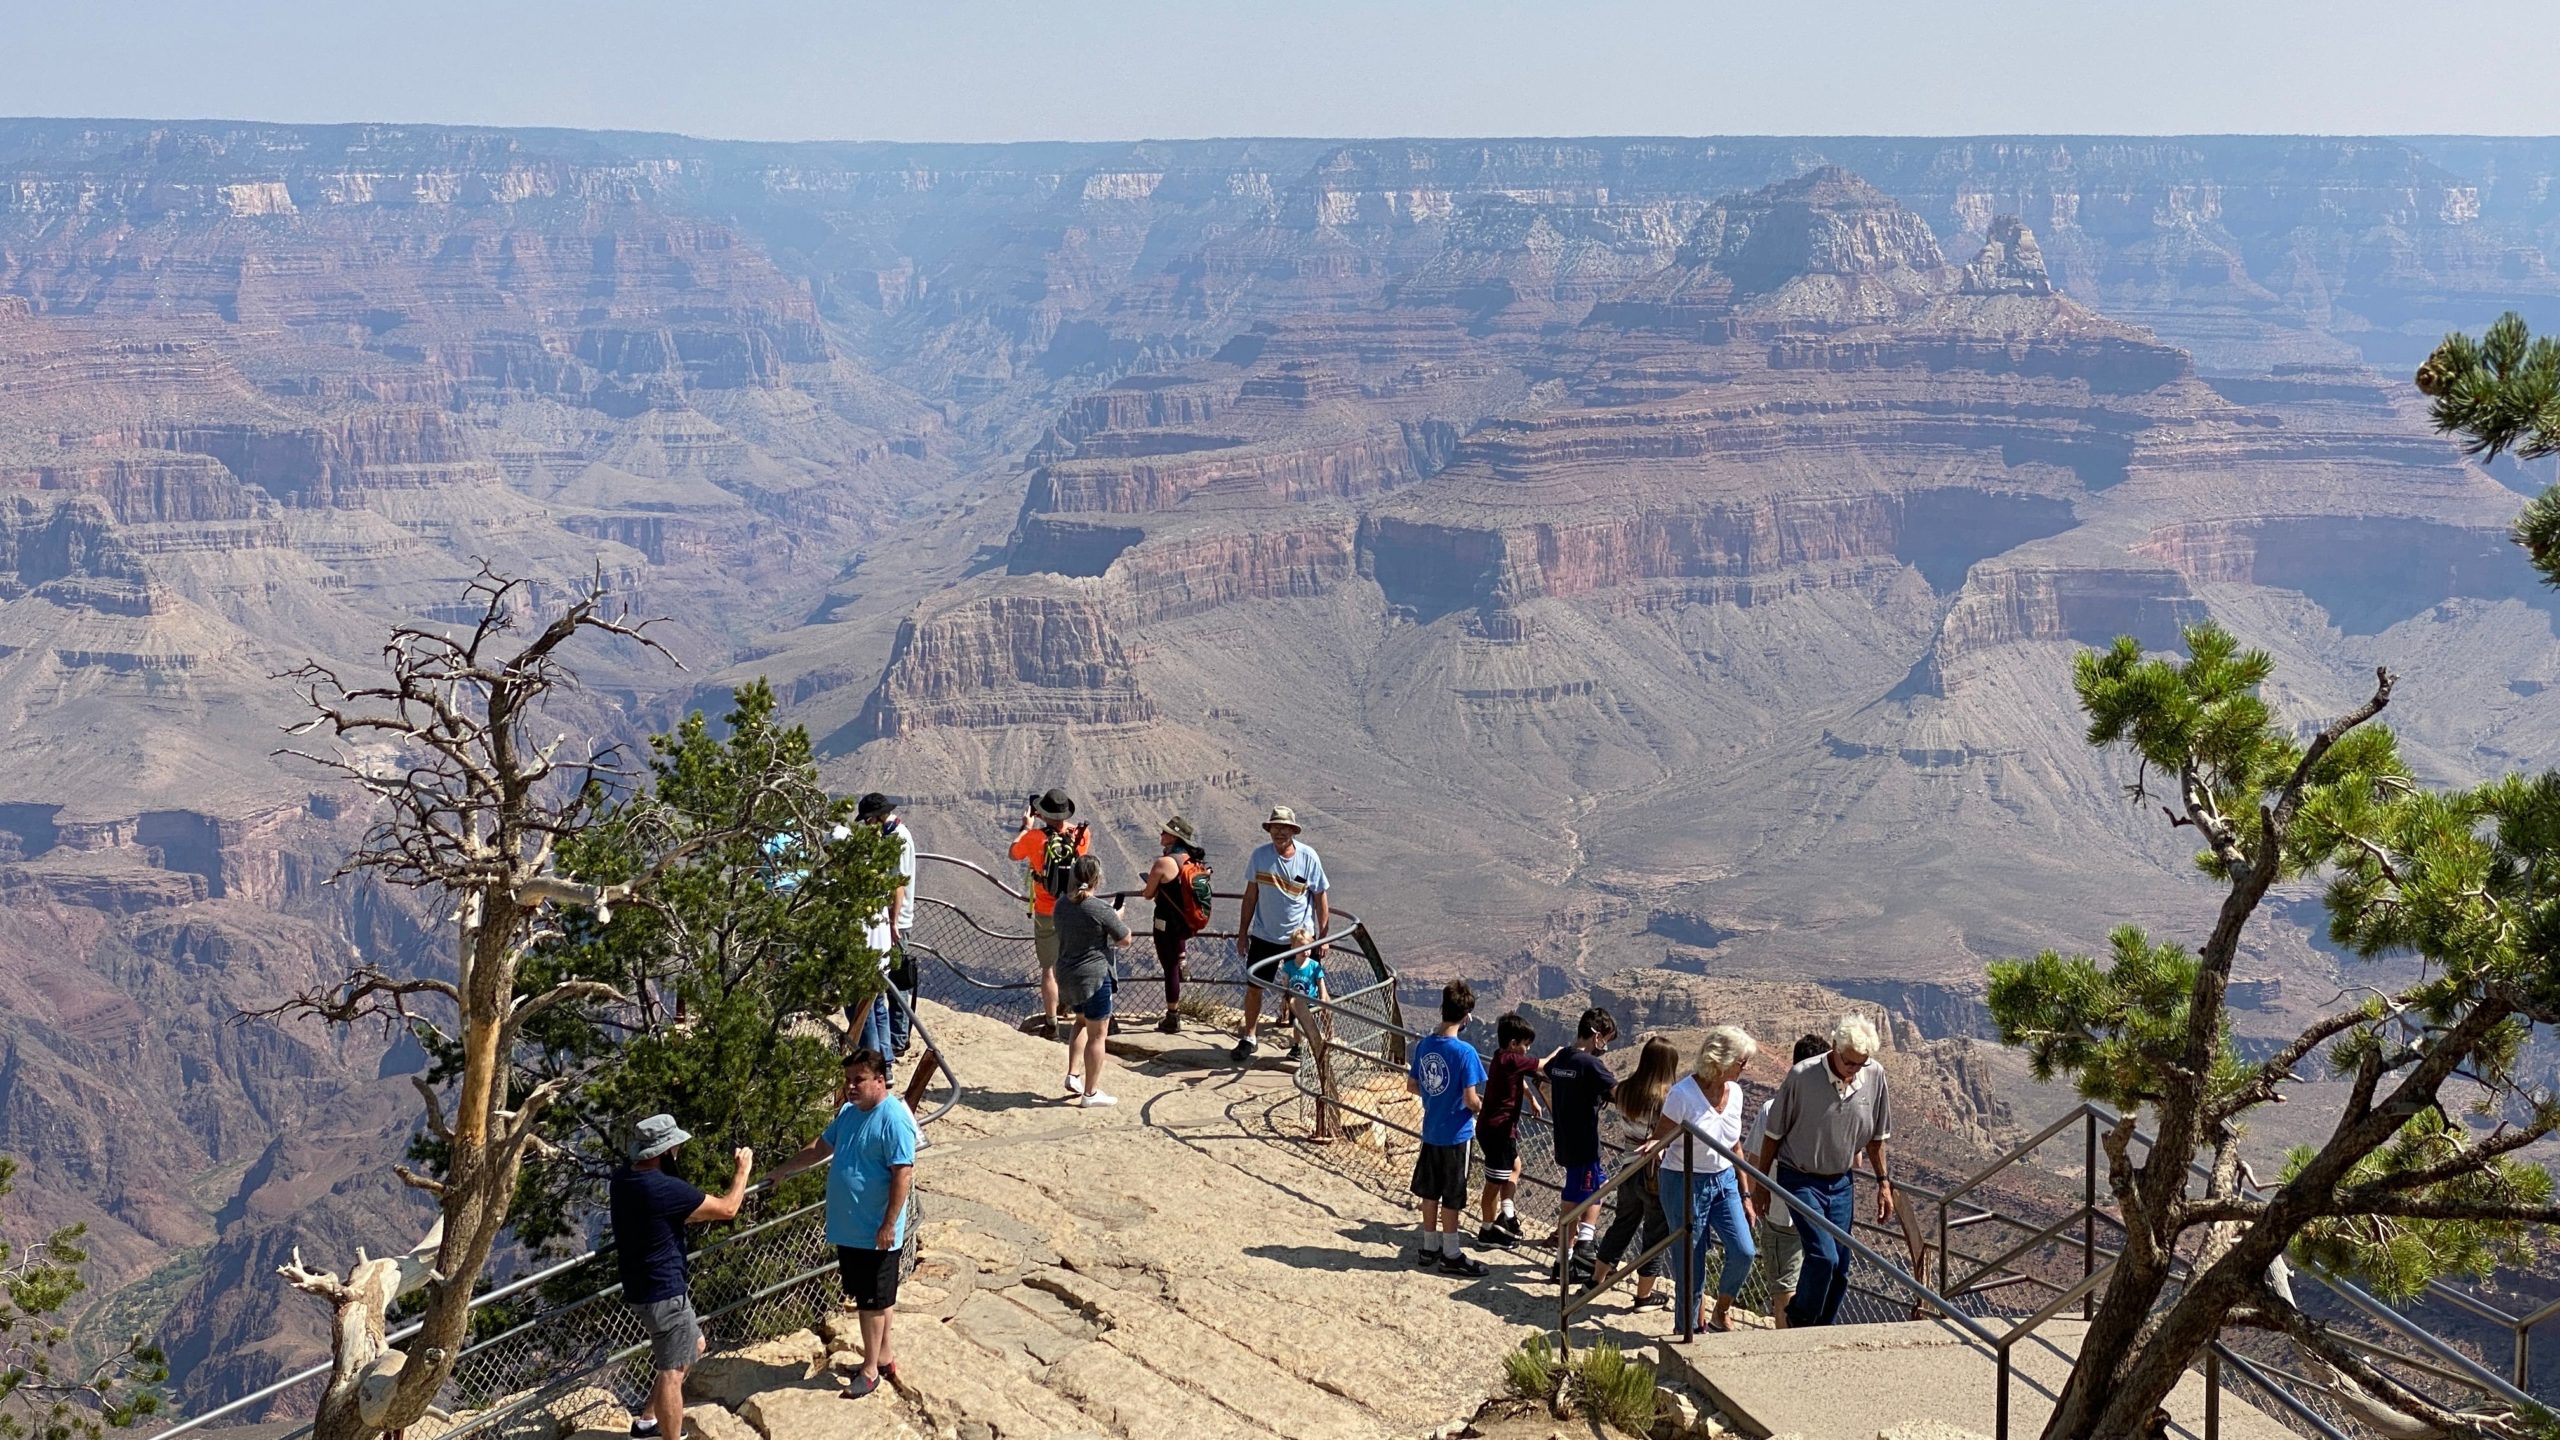 Tourists enjoy the breathtaking view of the Grand Canyon from the South Rim side on August 24, 2020 amid the coronavirus pandemic. (Photo by DANIEL SLIM/AFP via Getty Images)